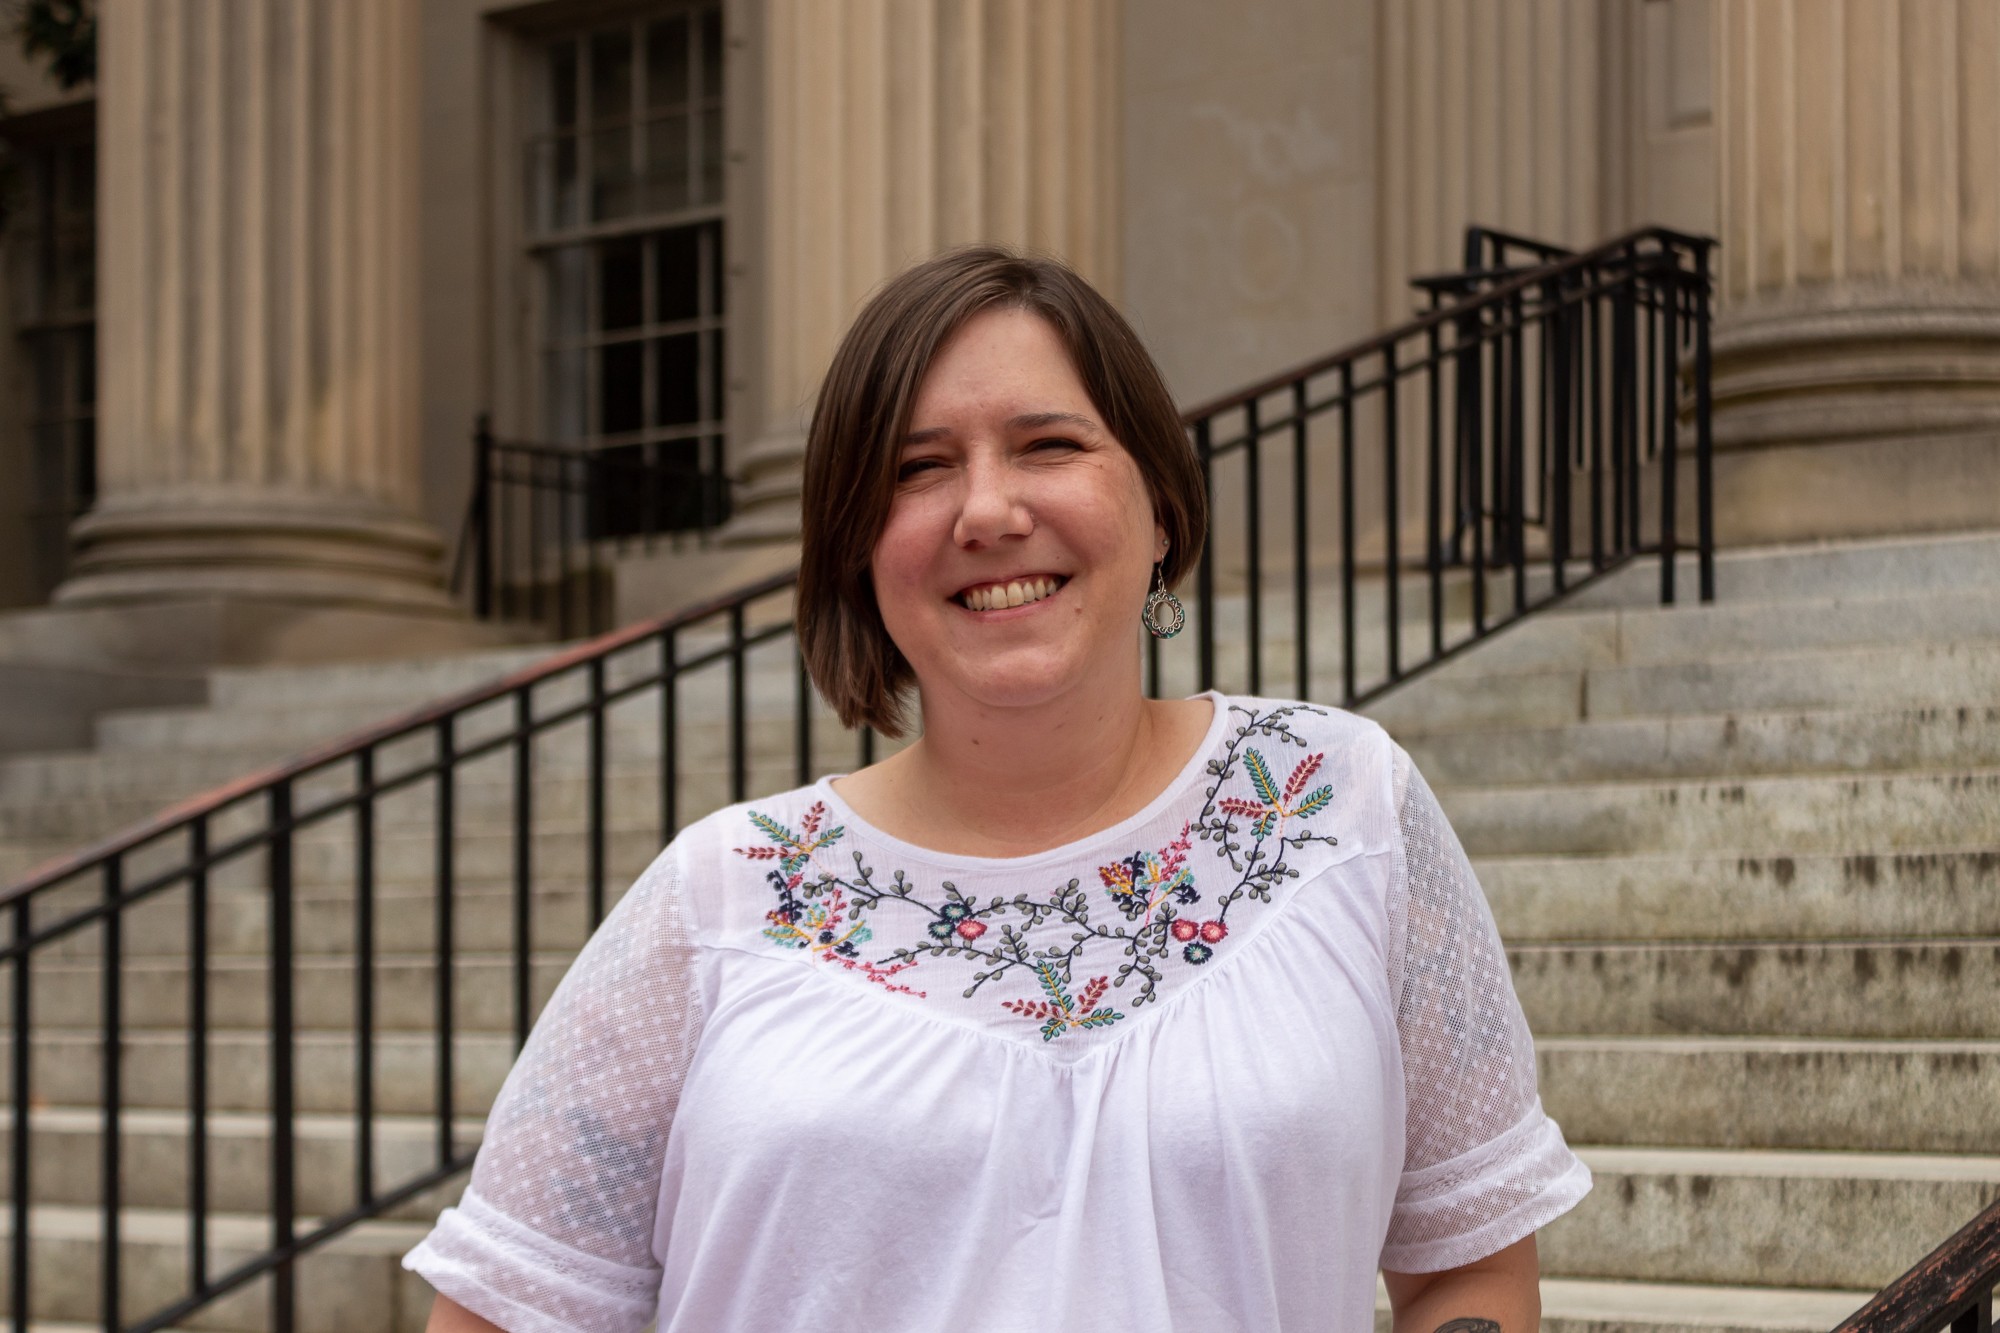 Portrait of Flannery Fitch, a UNC graduate and non-traditional student, smiling on the steps of Wilson Library. She has short brown hair, silver earrings and a white top with embroidered flowers.